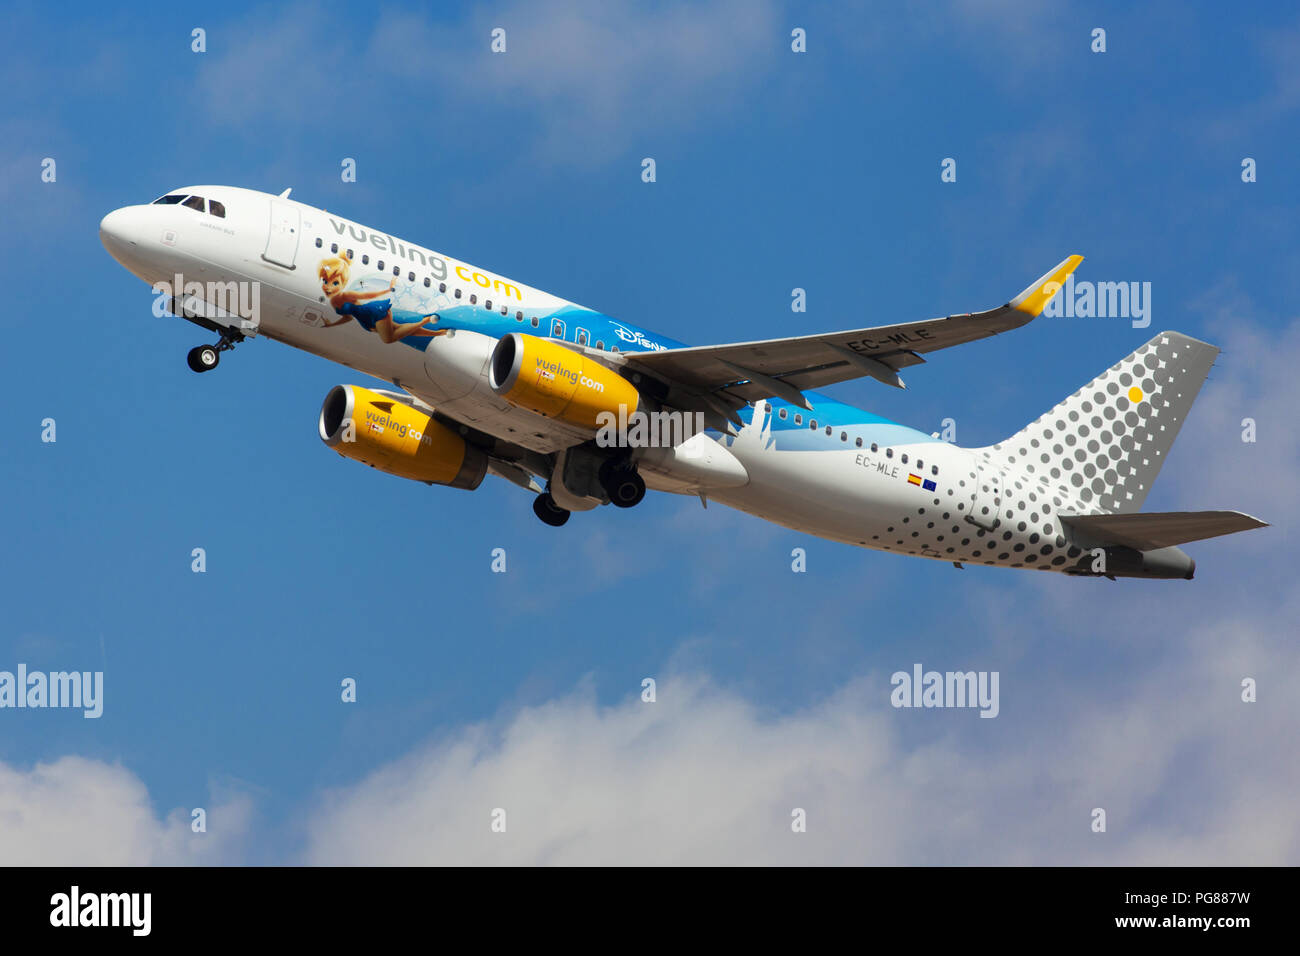 Barcelona, Spain - August 15, 2018: Vueling Airbus A320 with 25 Years Disneyland special livery taking off from El Prat Airport in Barcelona, Spain. Stock Photo